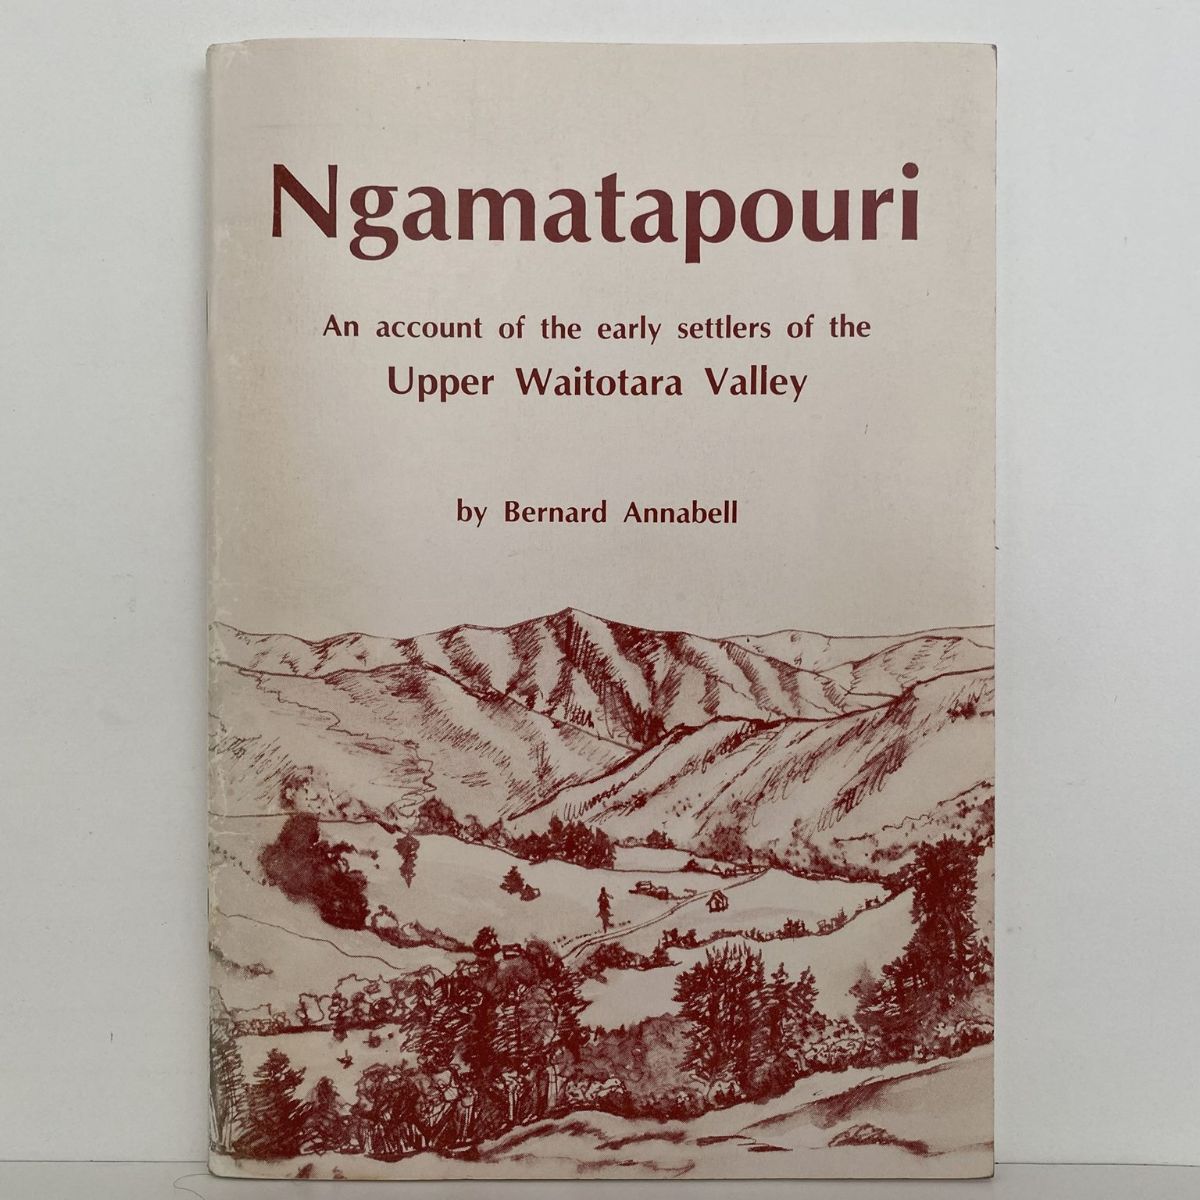 NGAMATAPOURI: An account of the early settlers of the Upper Waitotara Valley